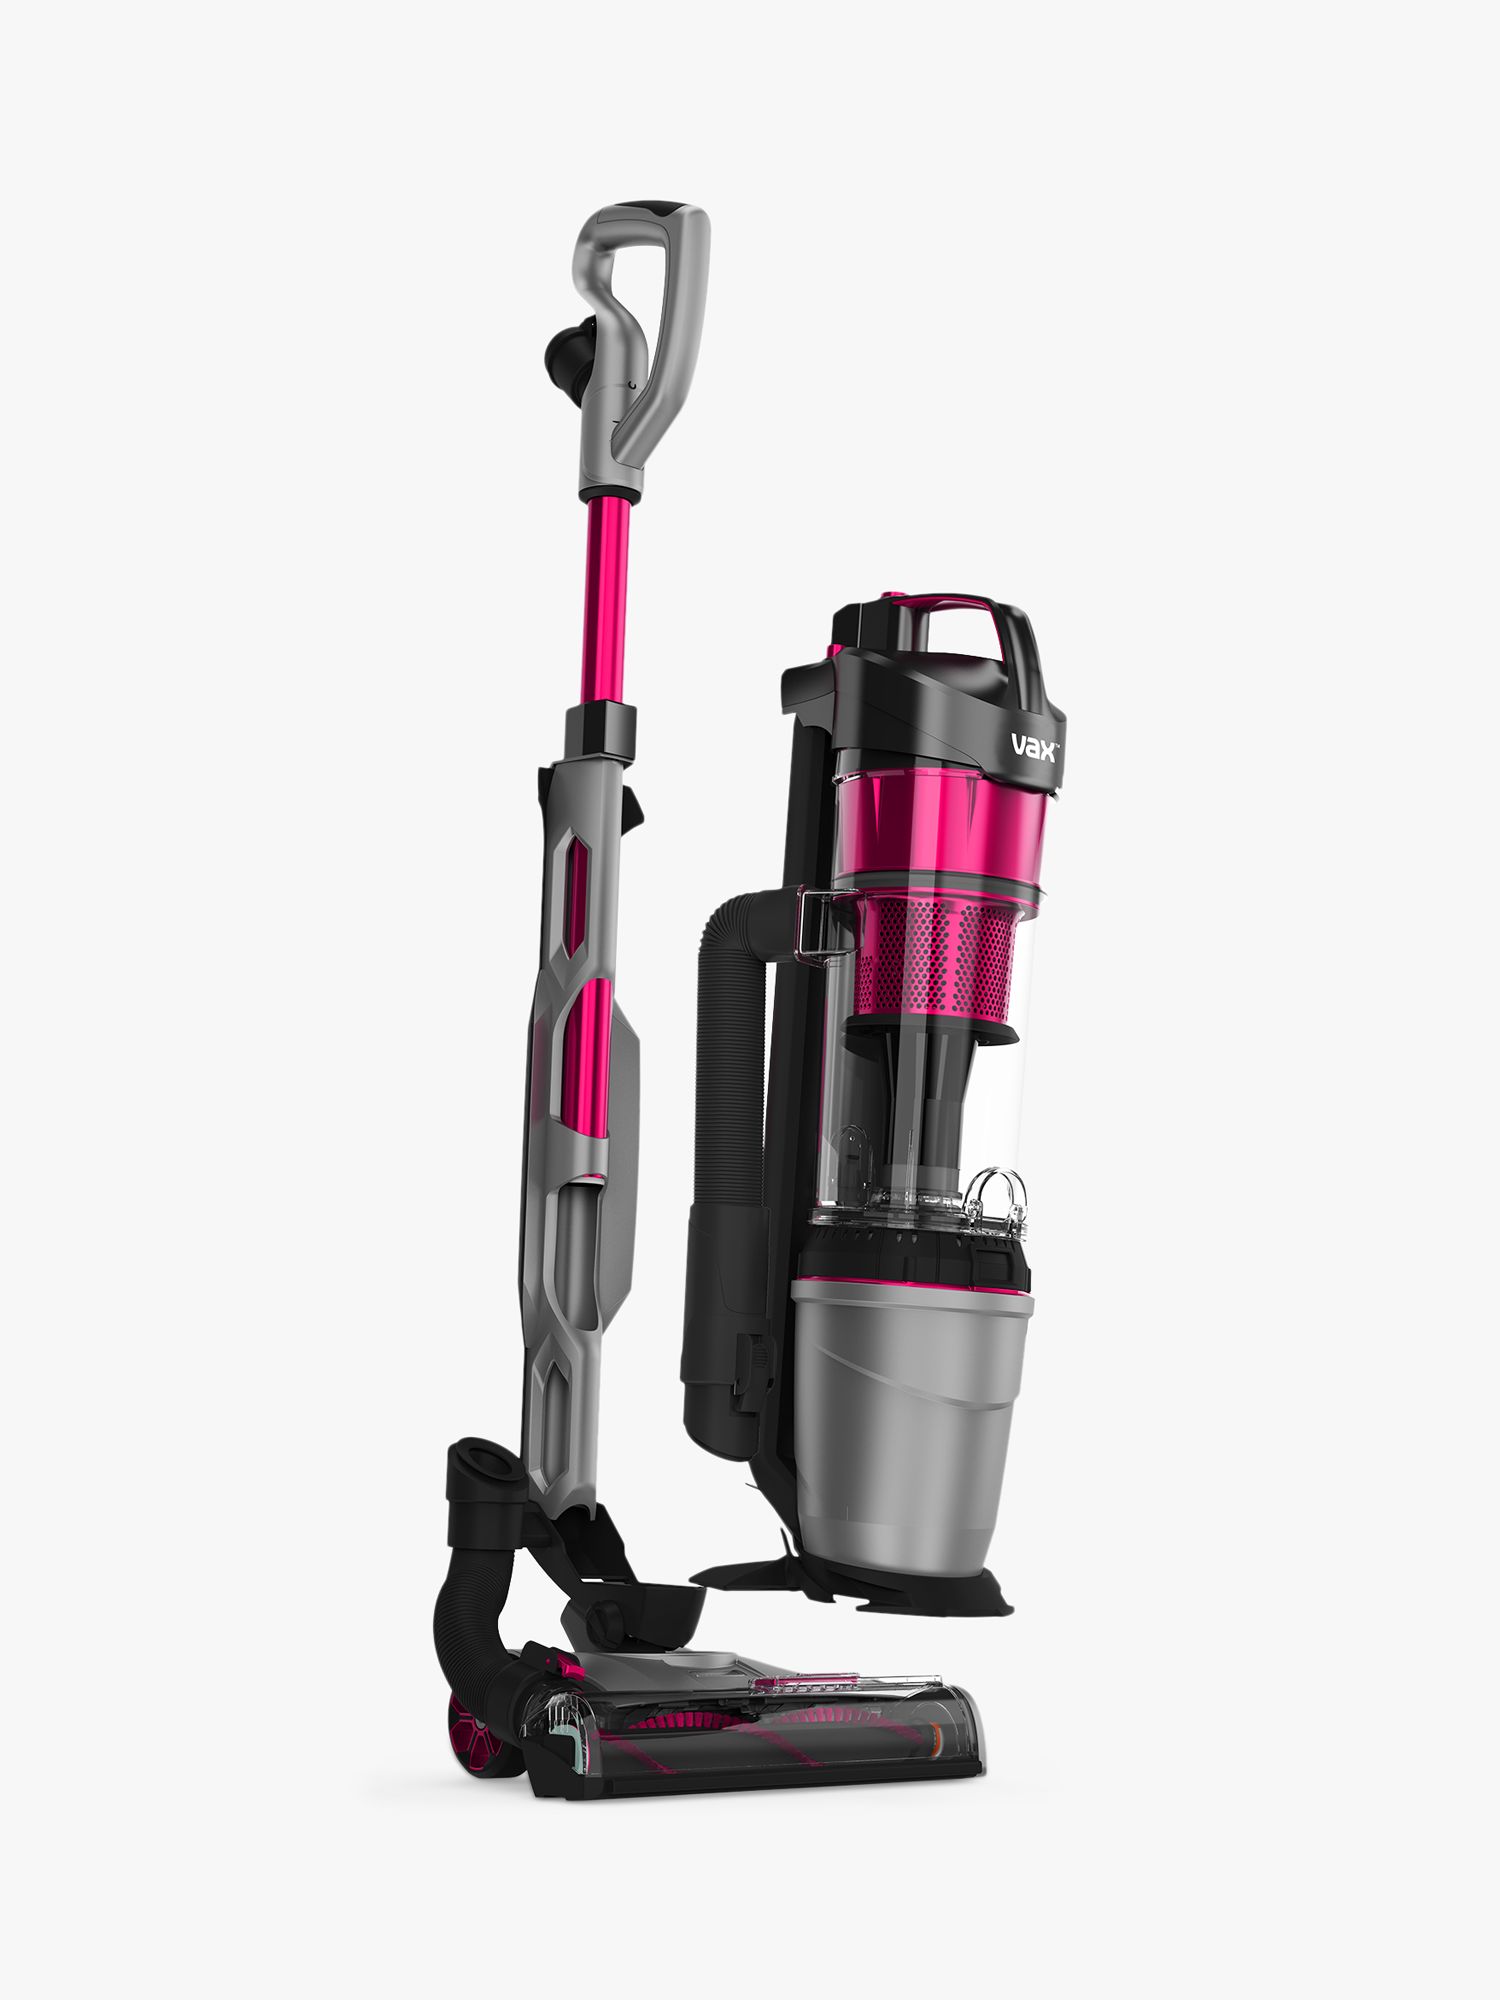 Vax Vacuum Cleaner: What are the common problems?